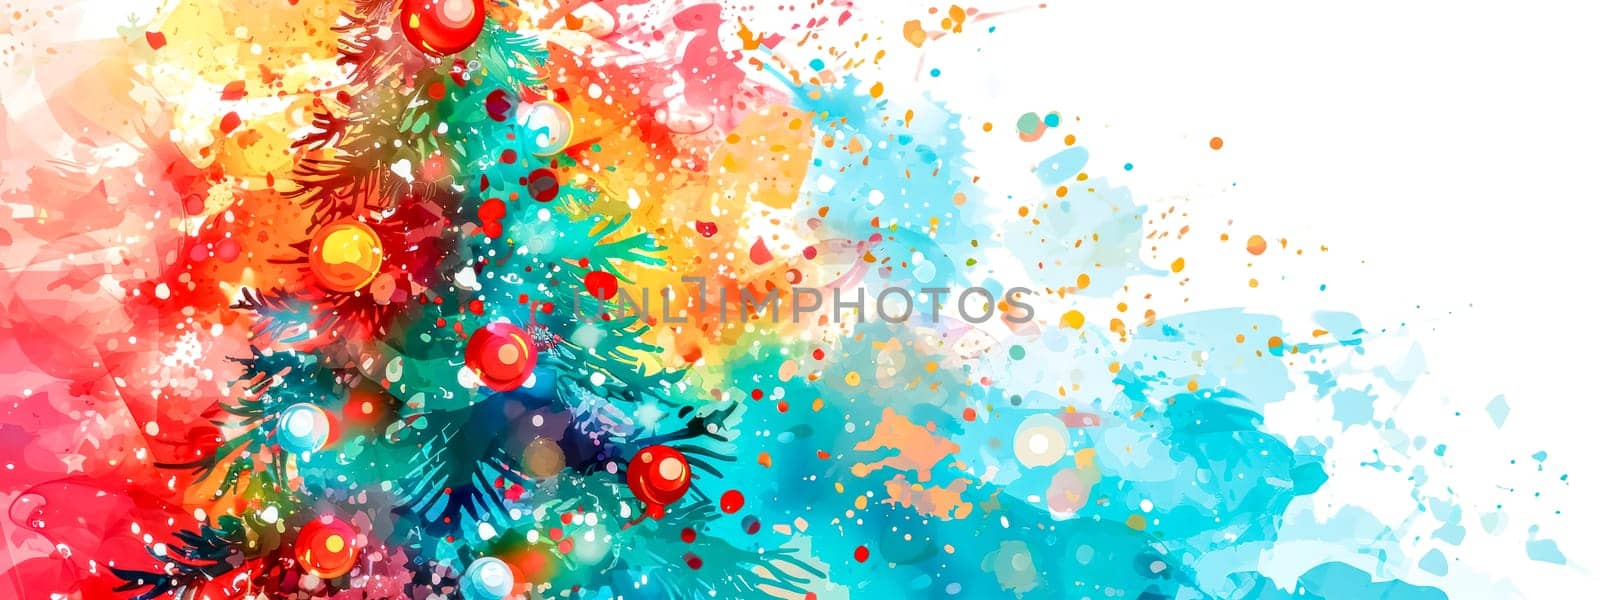 vibrant watercolor explosion of colors with a Christmas tree adorned with ornaments, ideal for a festive background with space for text